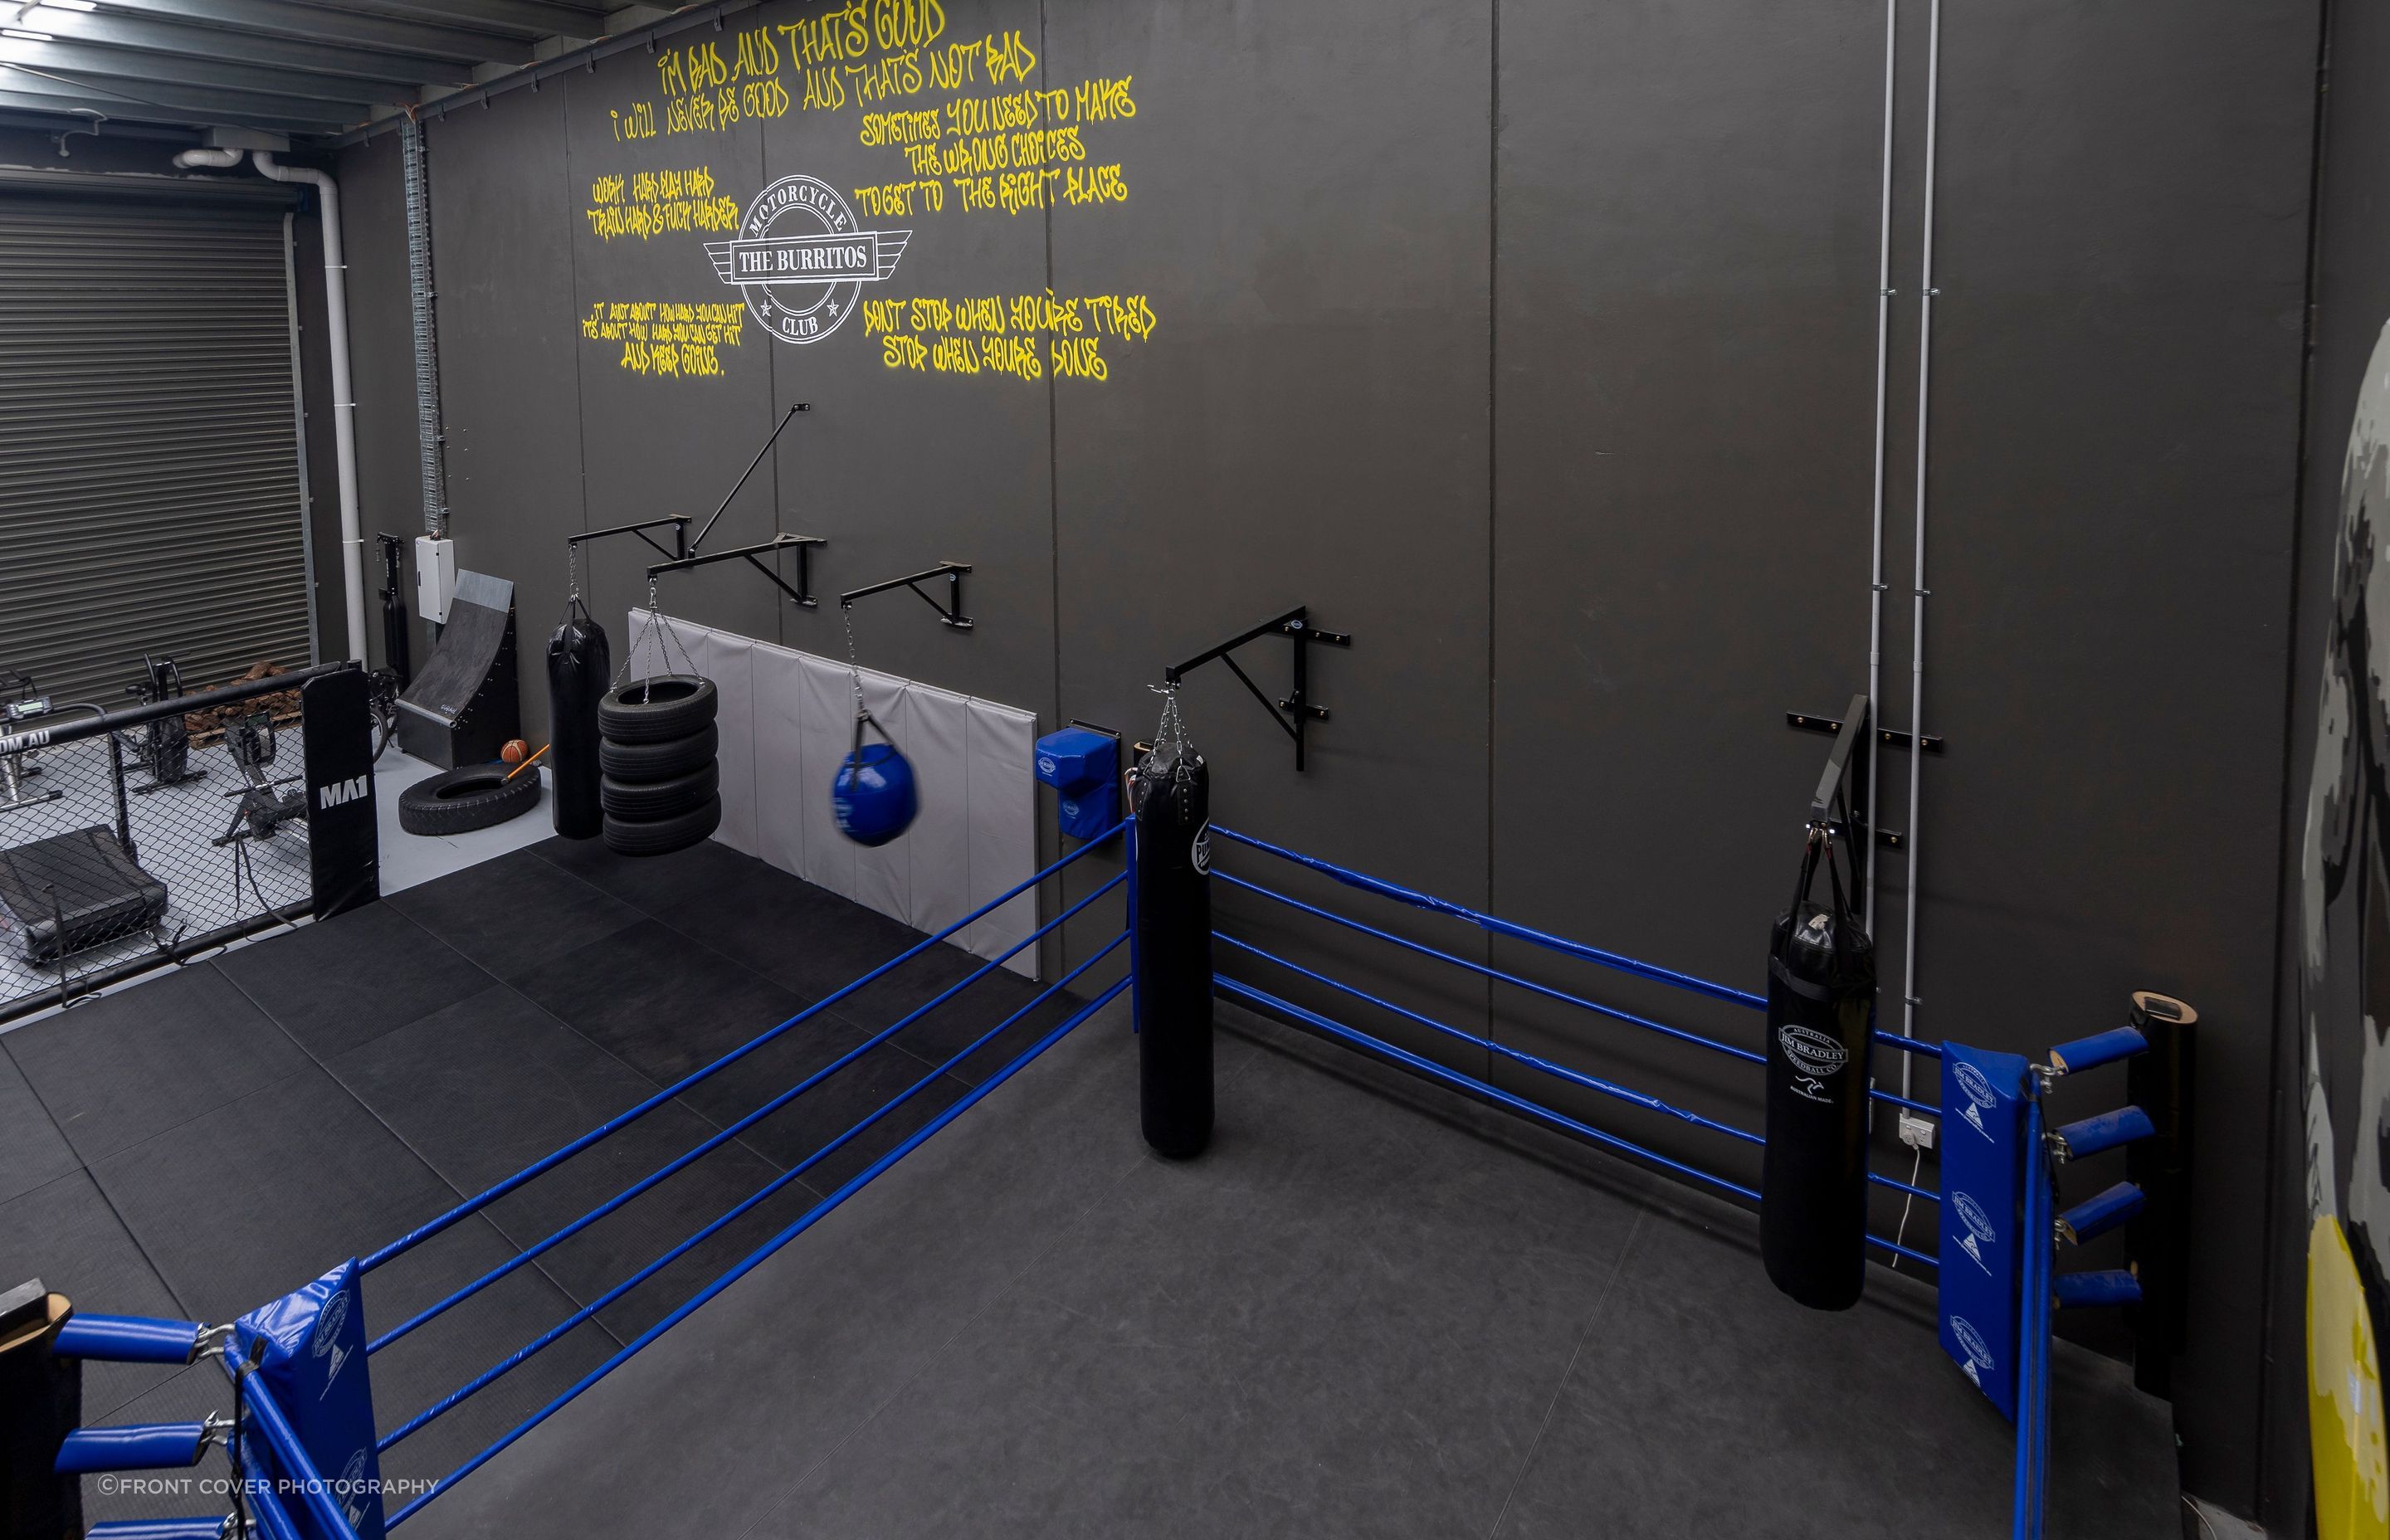 Mezzanine overlooking the massive boxing ring in this Private Boxing Club